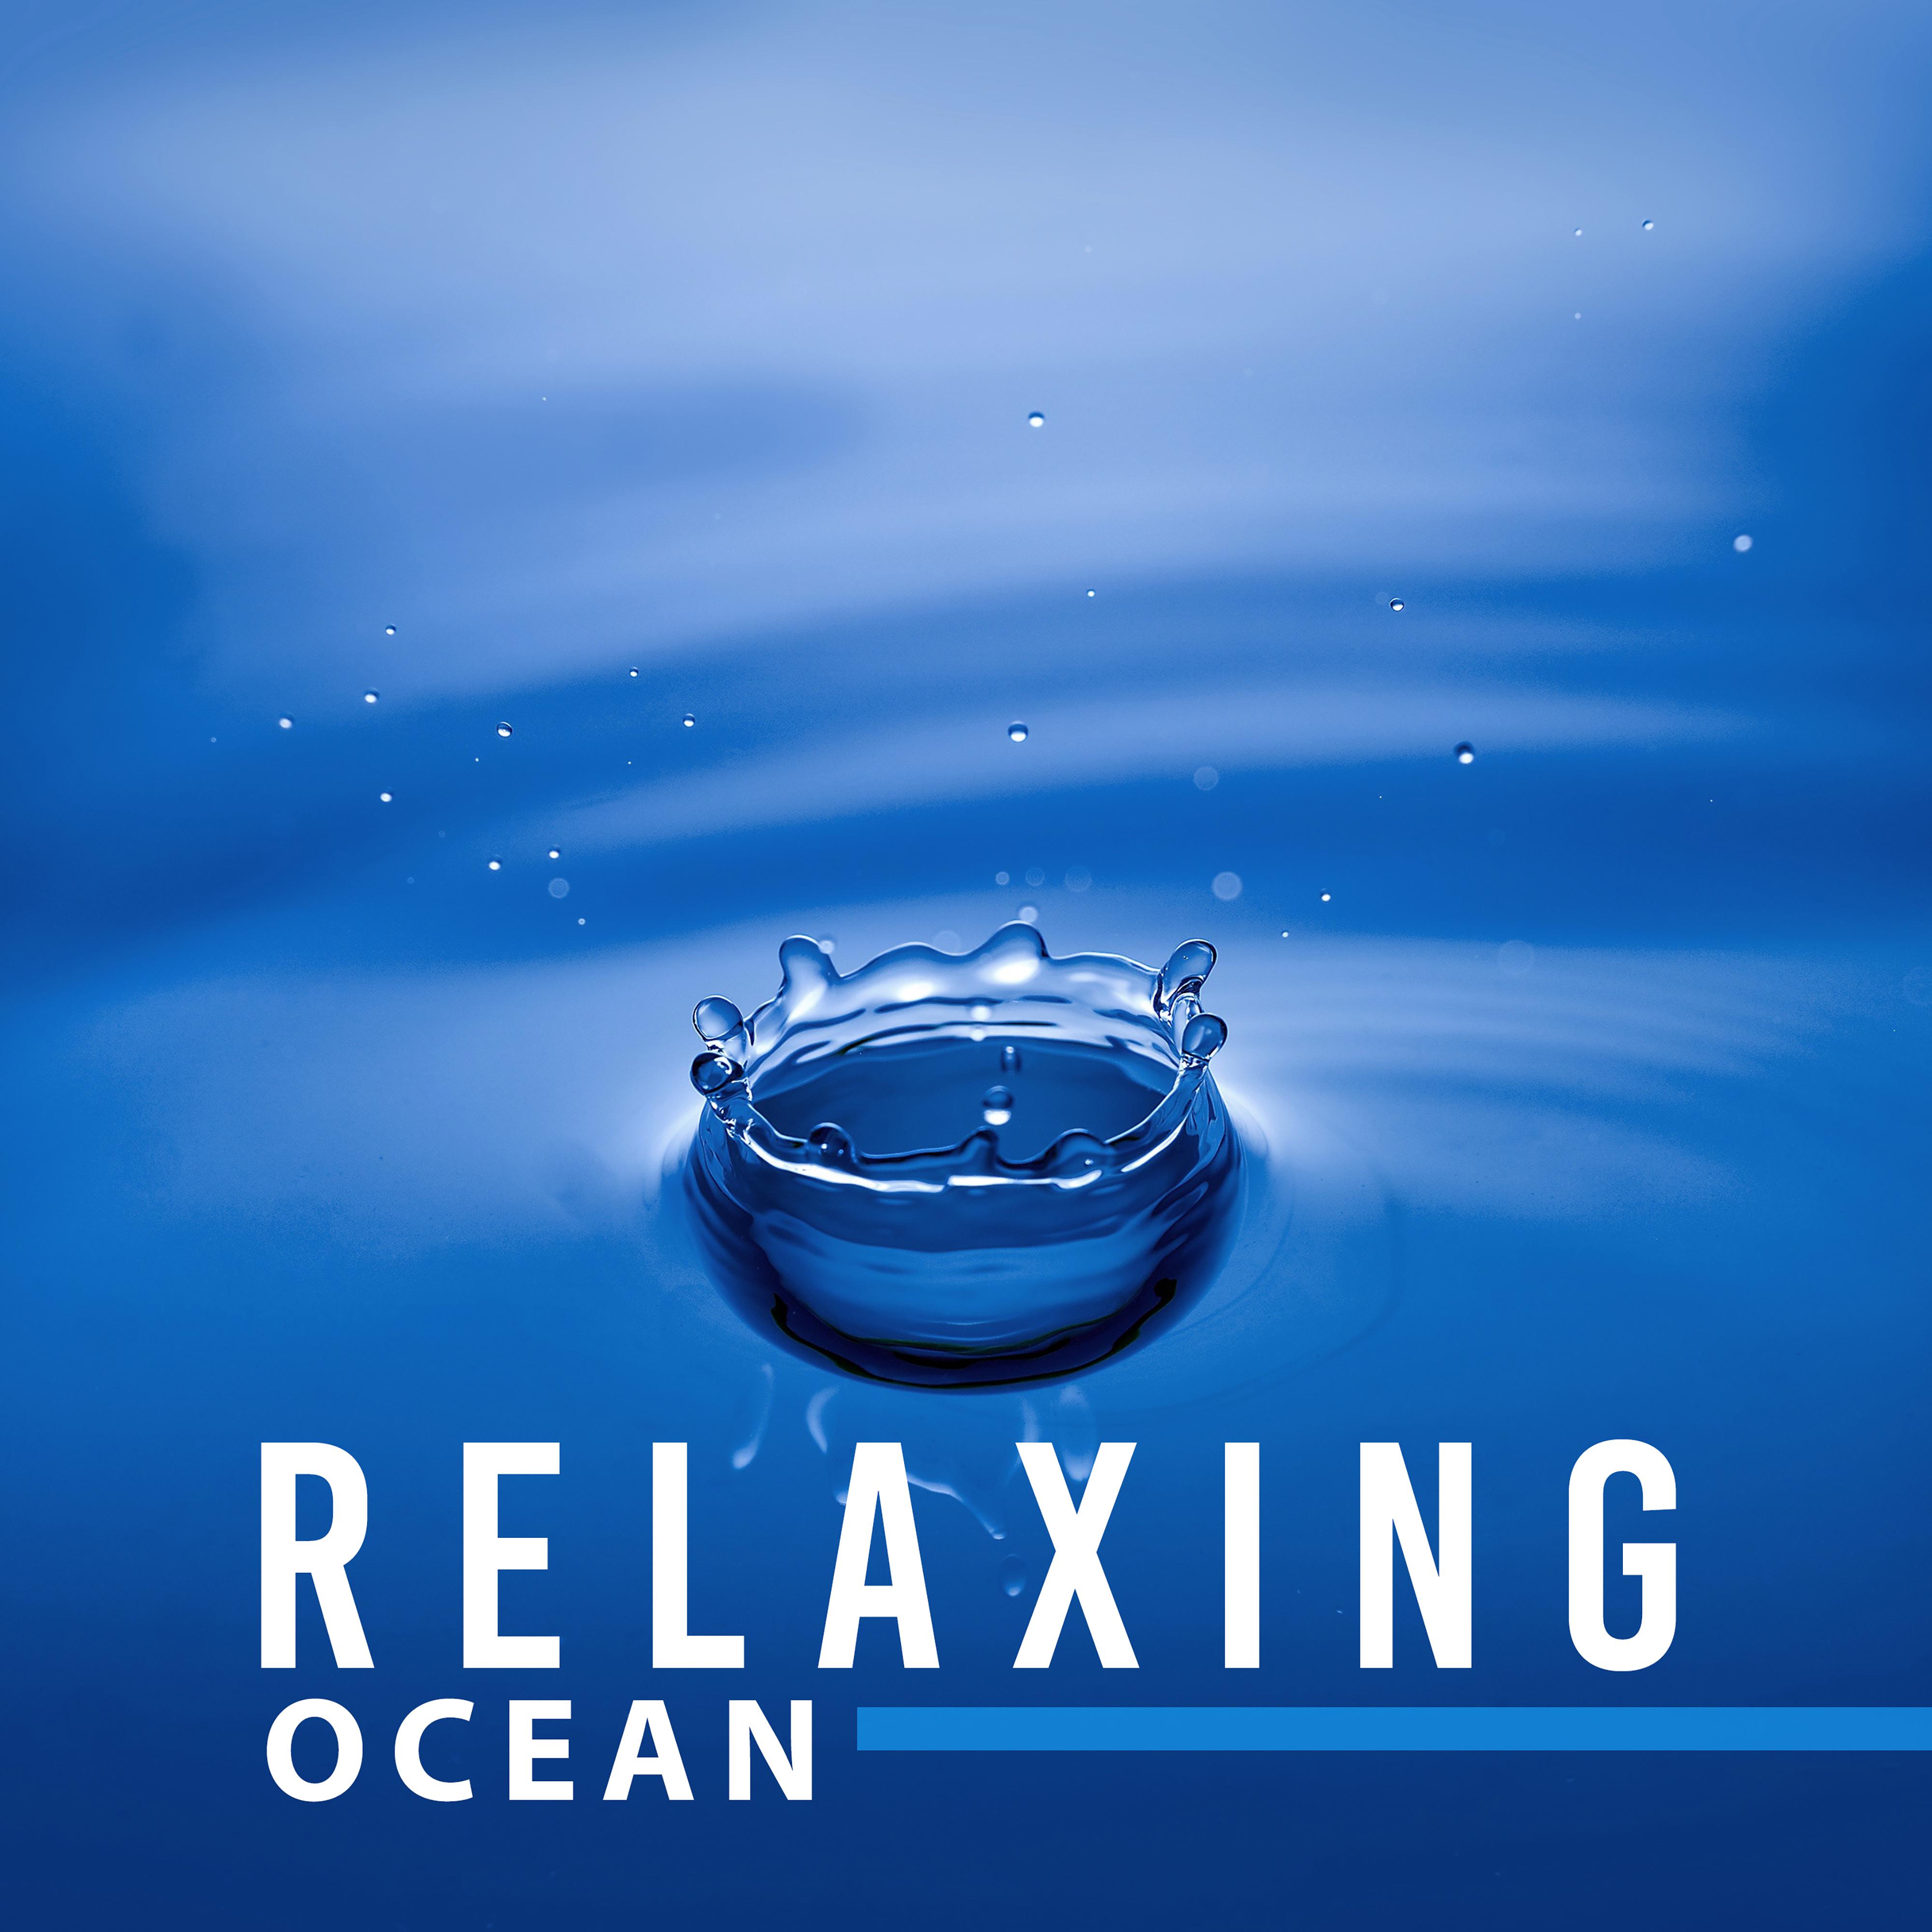 Relaxing Ocean – Soothing New Age Music, Rest a Bit, Soft Sounds, Peaceful Mind